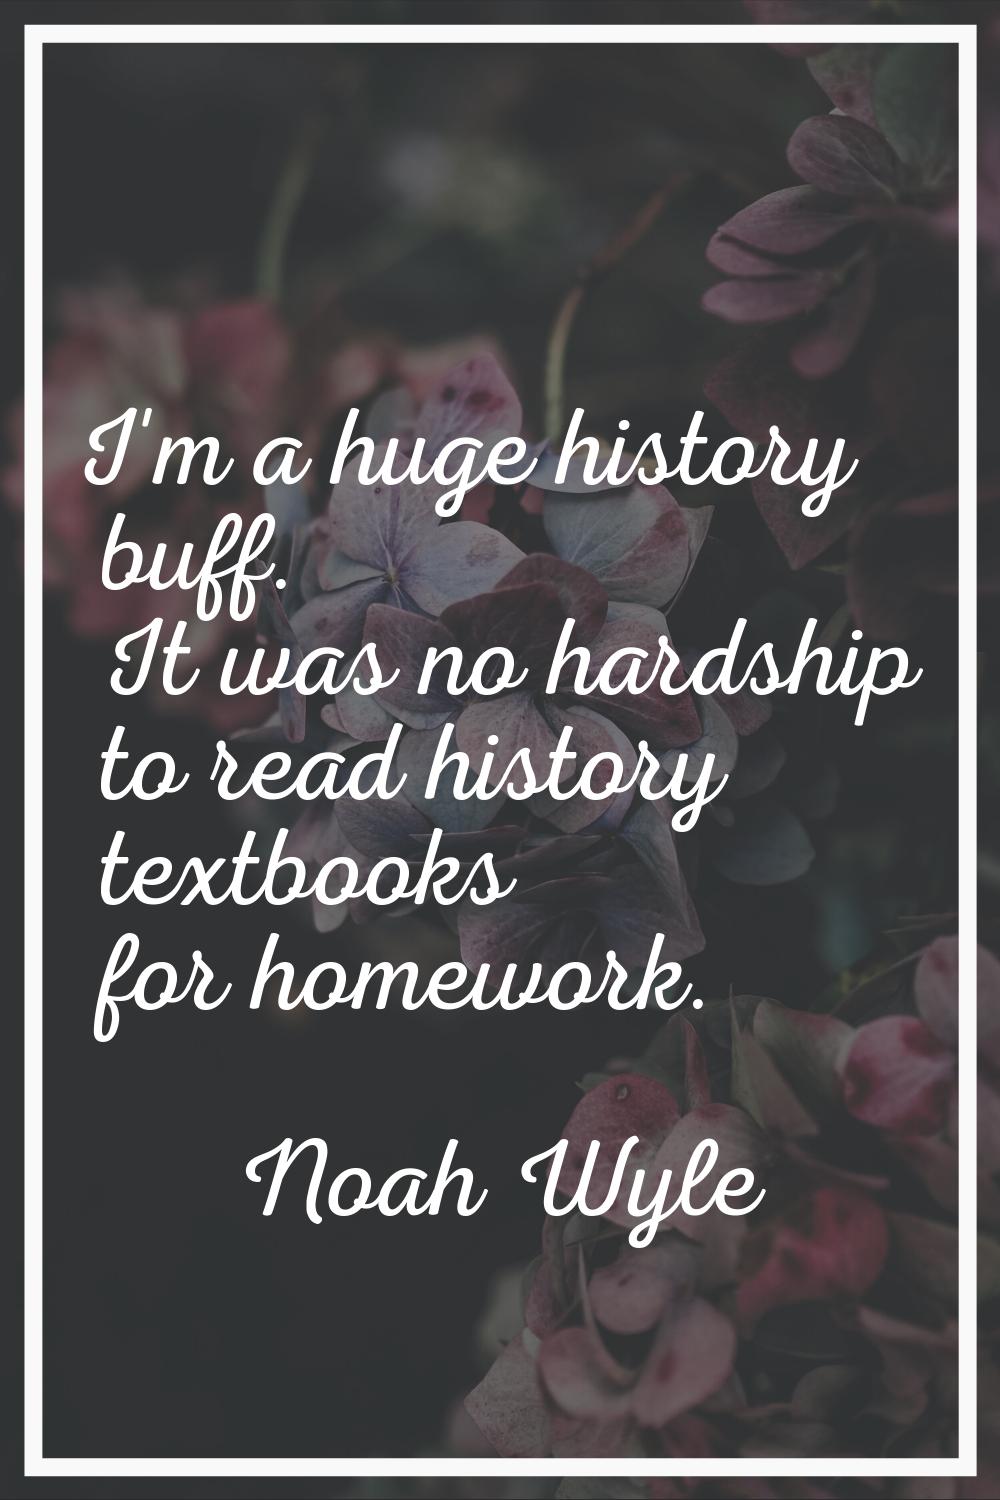 I'm a huge history buff. It was no hardship to read history textbooks for homework.